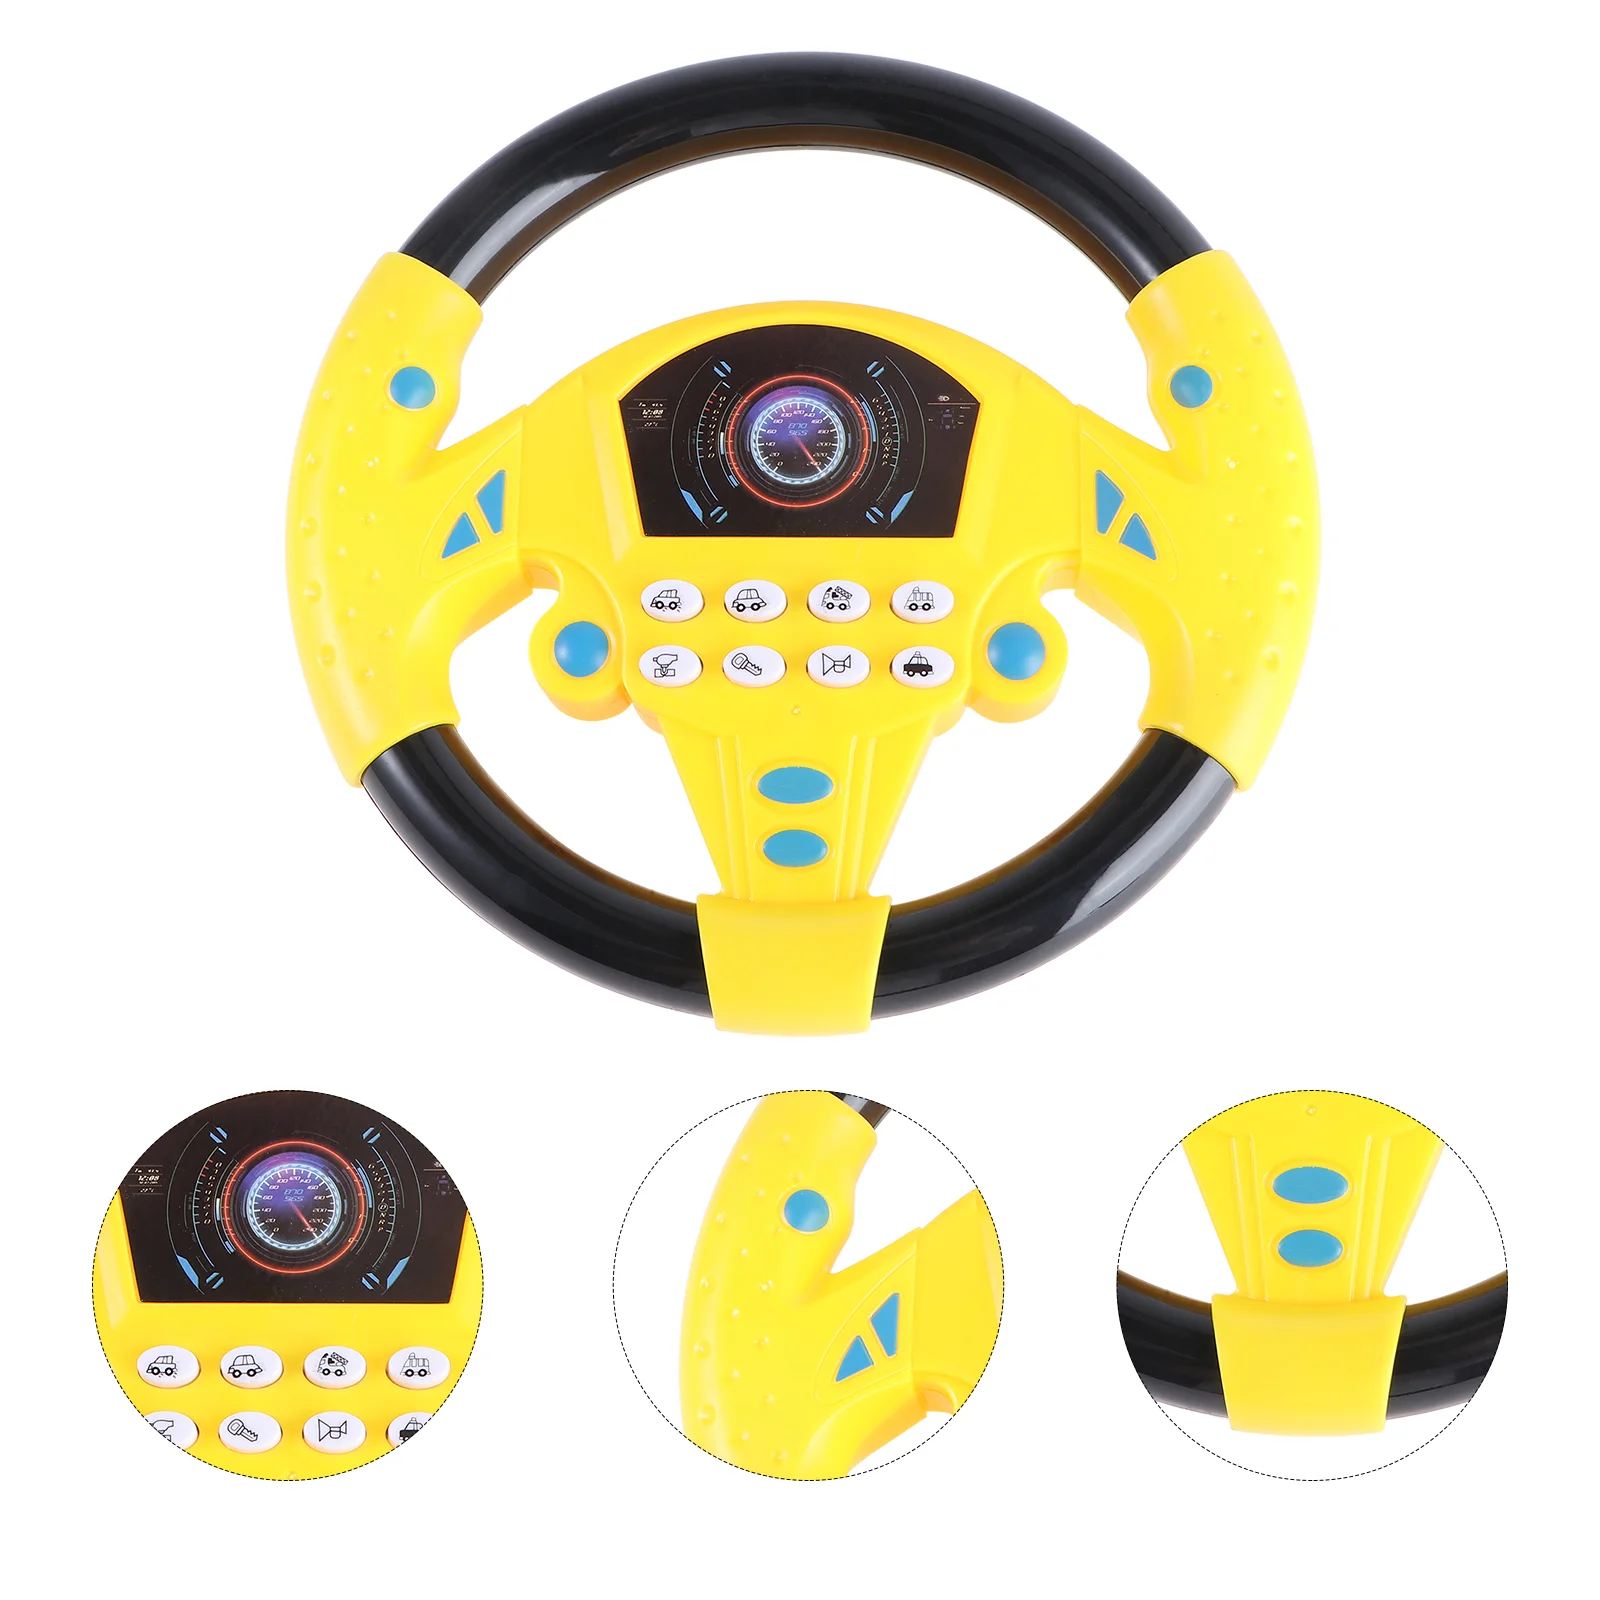 

Wheel Steeringtoy Driving Kids Car Toys Toddlers Toddler Simulated Wheels Educational Bumperthebackseat Buddy Pretend Electronic